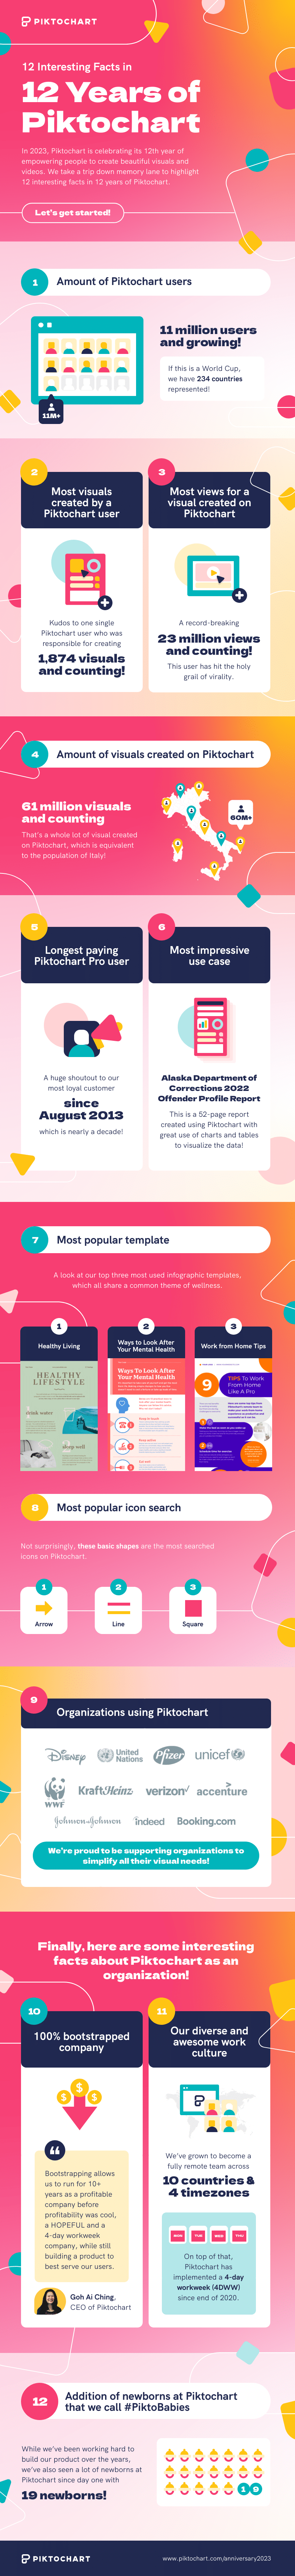 infographic of 12 interesting facts in 12 years of piktochart